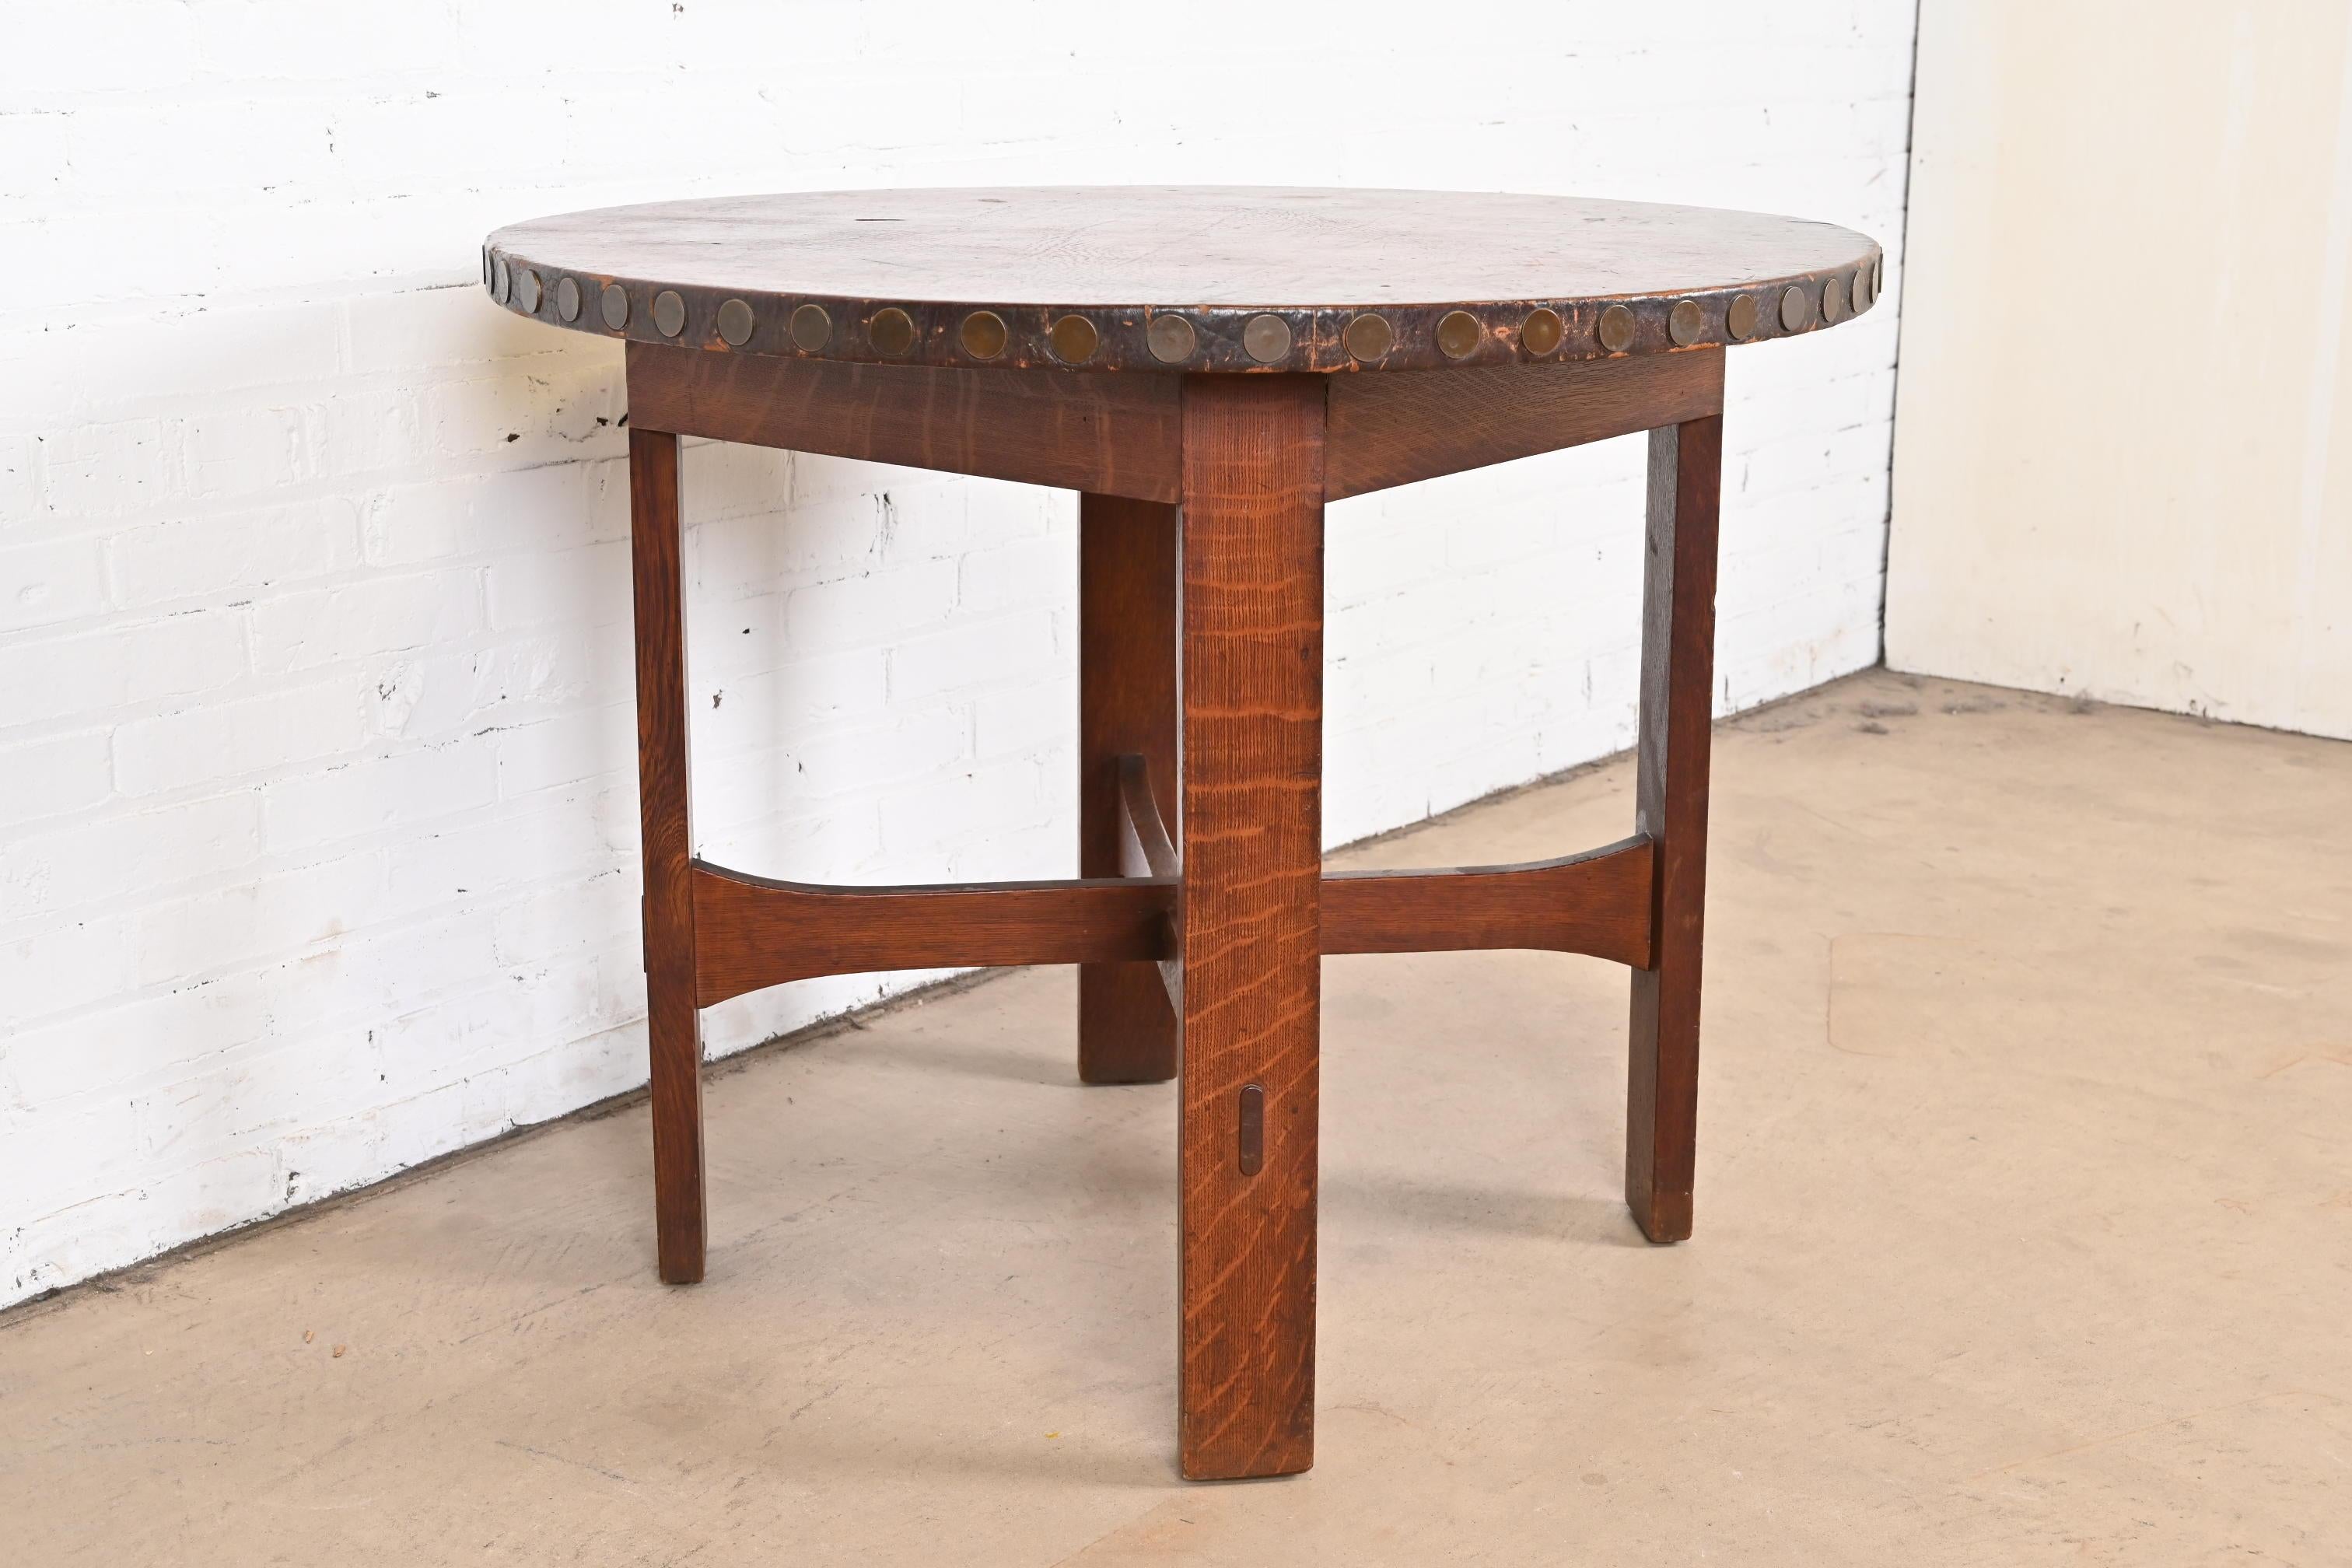 20th Century Stickley Brothers Arts & Crafts Oak Leather Top Lamp Table or Center Table